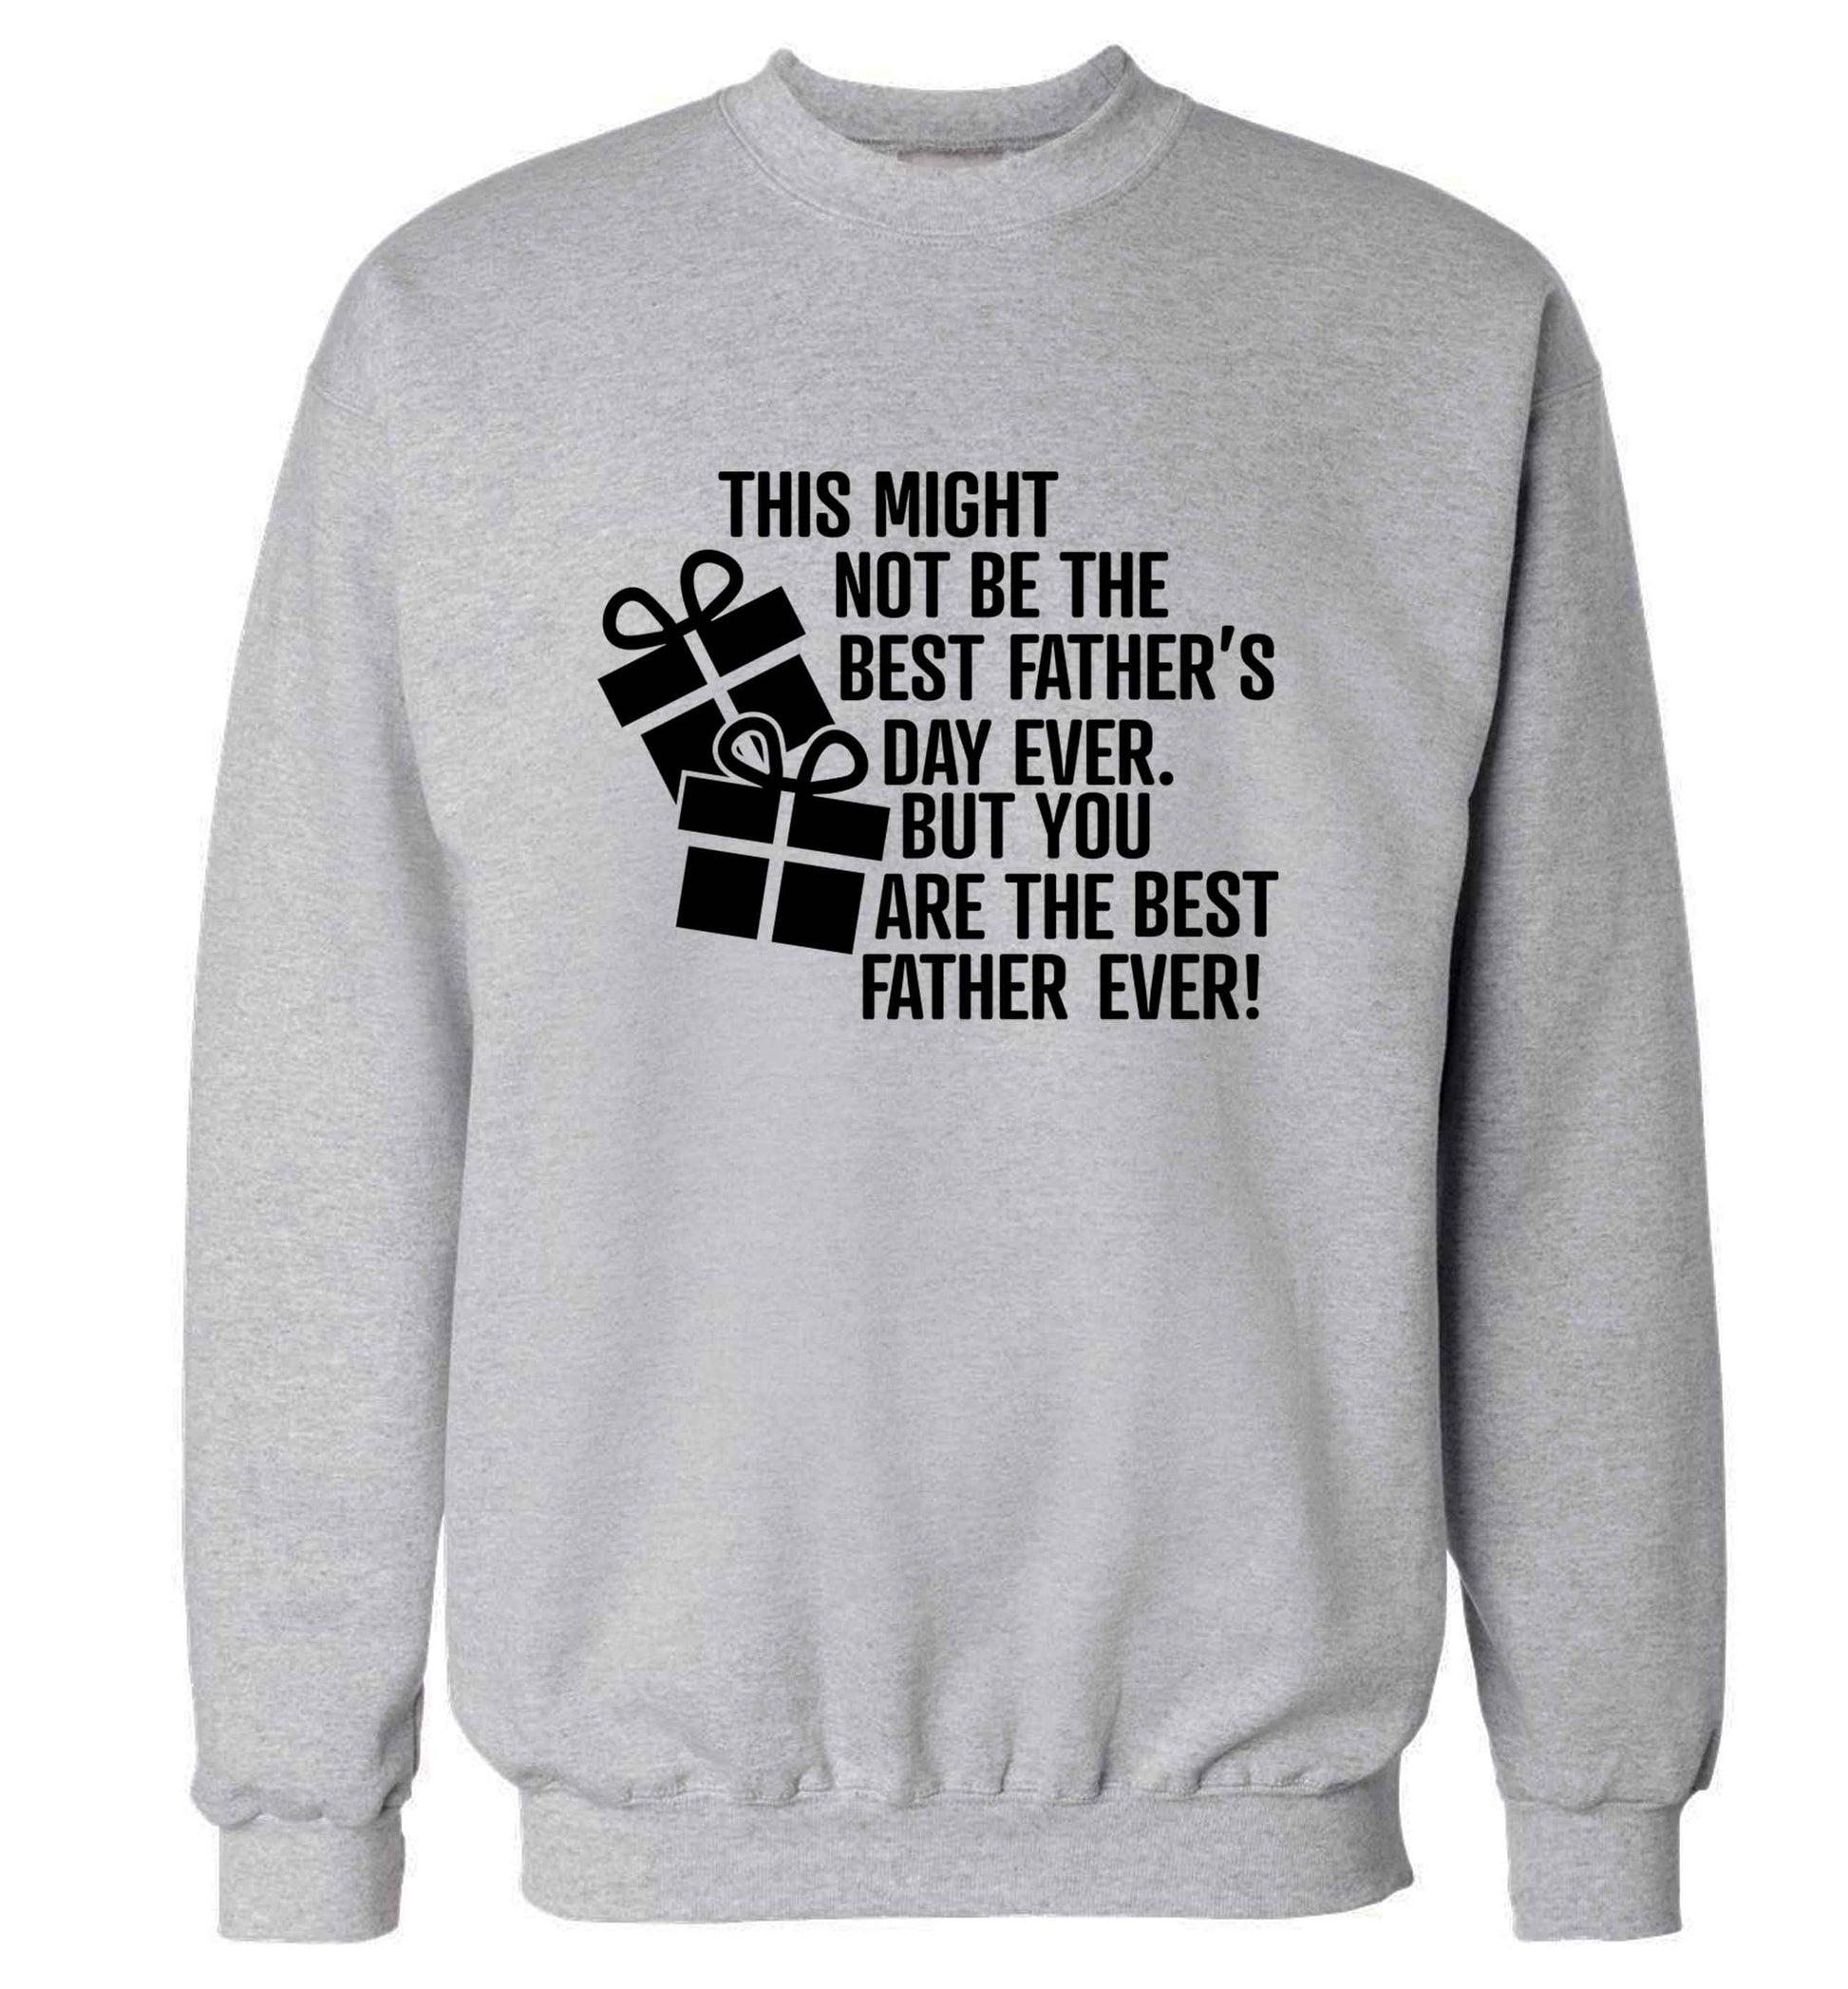 It might not be the best Father's Day ever but you are the best father ever! adult's unisex grey sweater 2XL